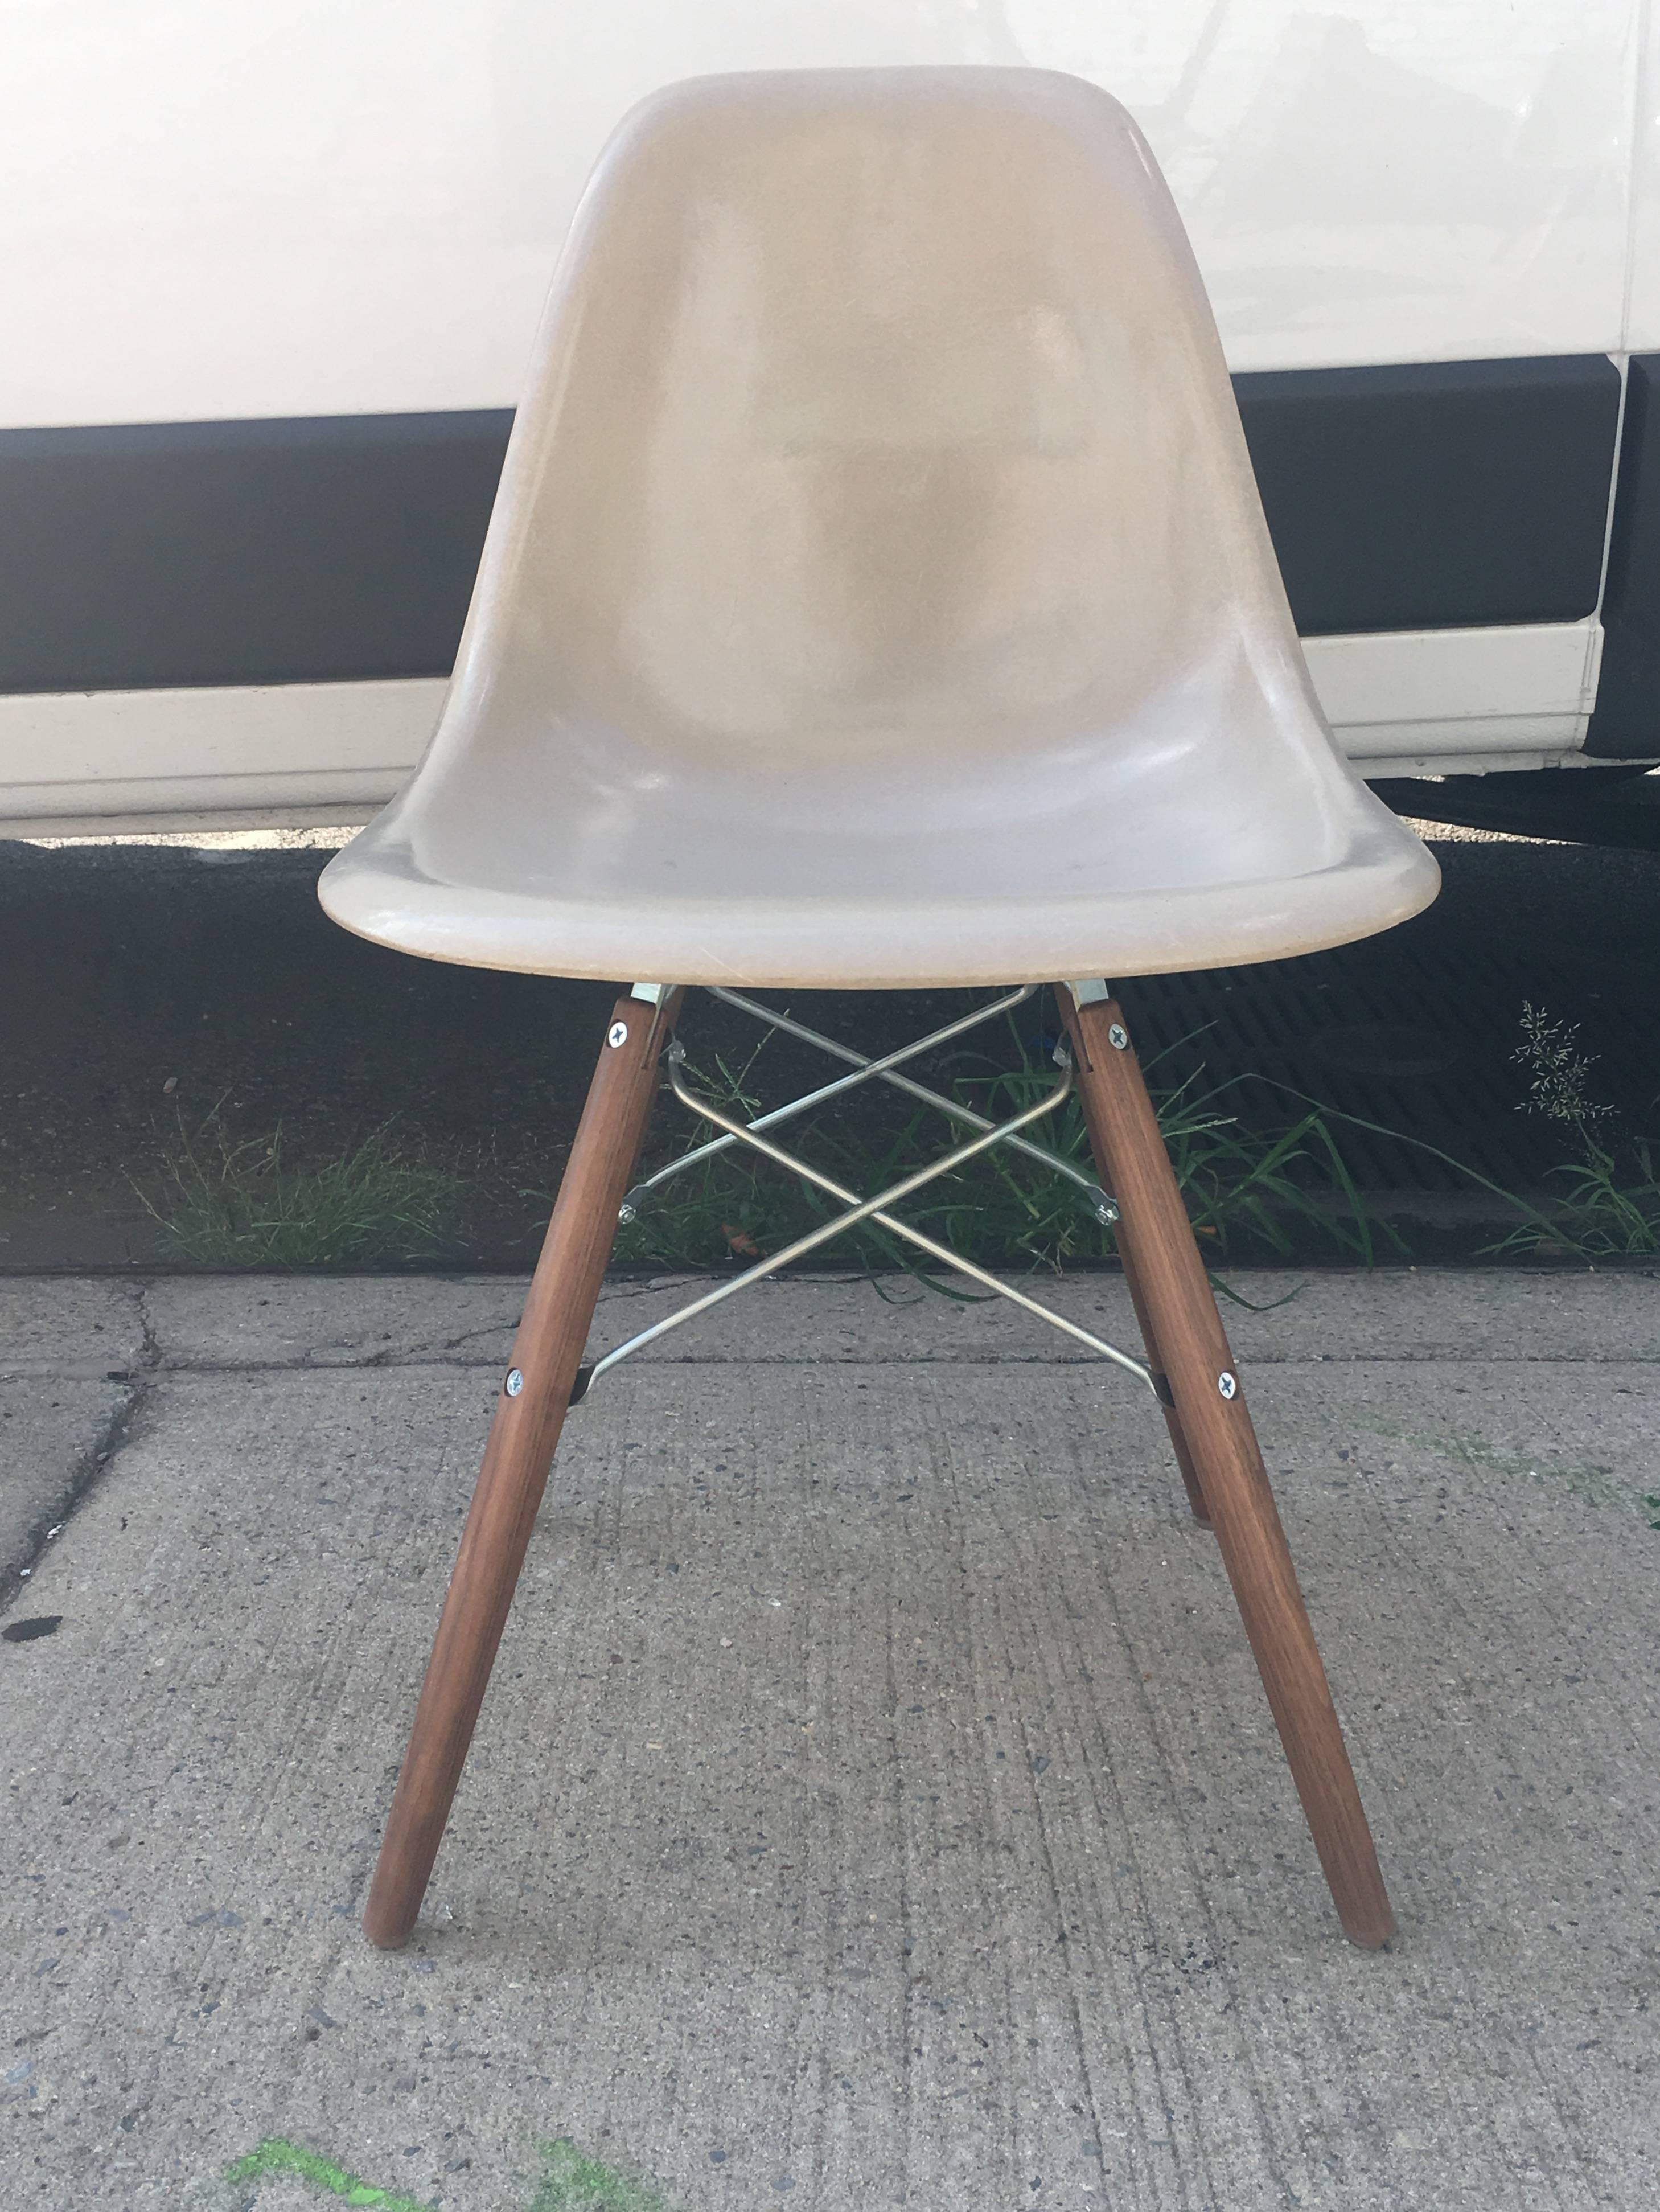 Eight Herman Miller Eames dining chairs in parchment and tan. New walnut bases. Excellent condition. Signed.